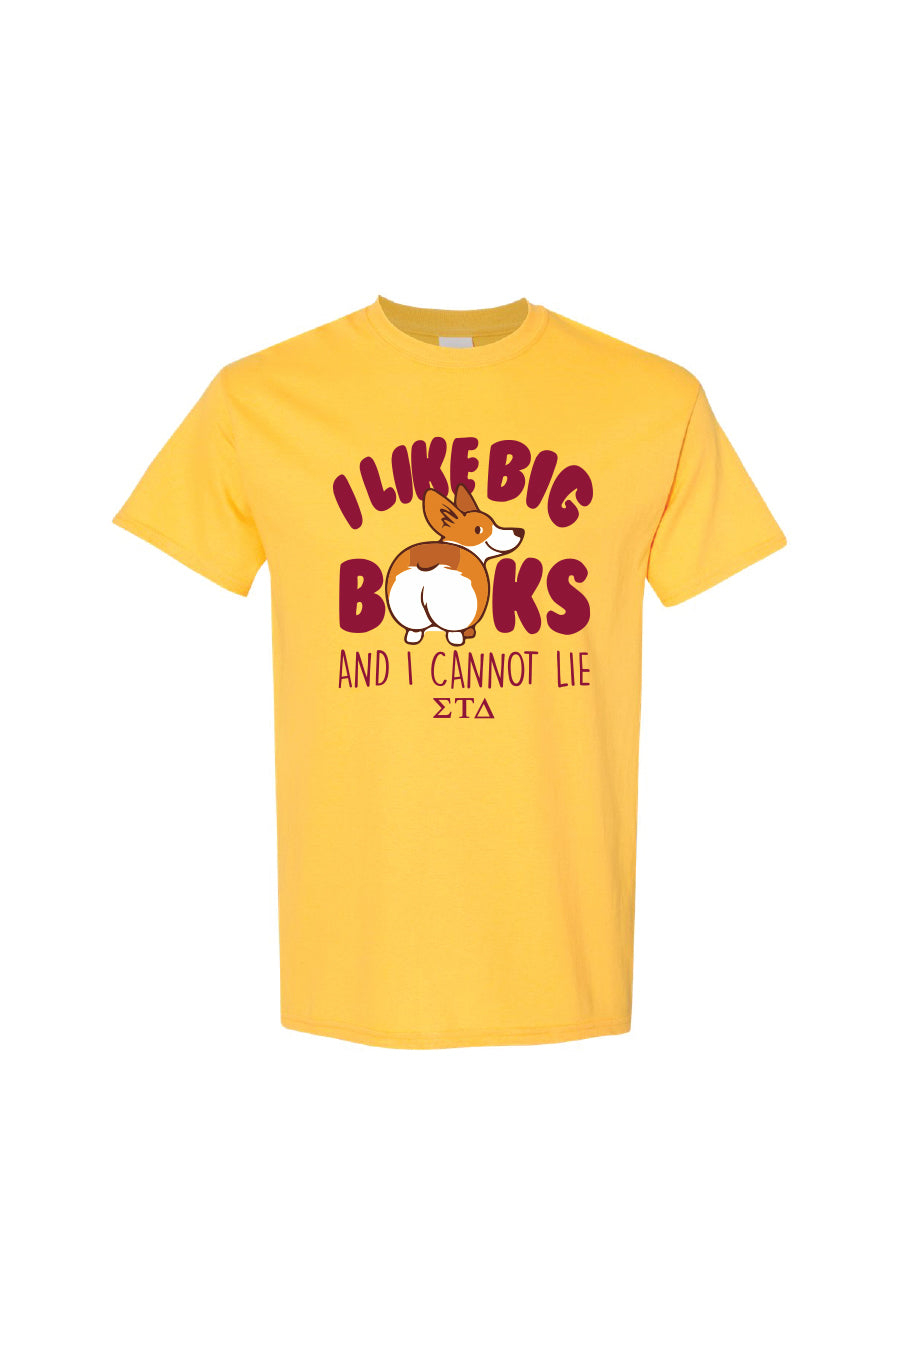 Big Books Tee (Multiple Colors Available)